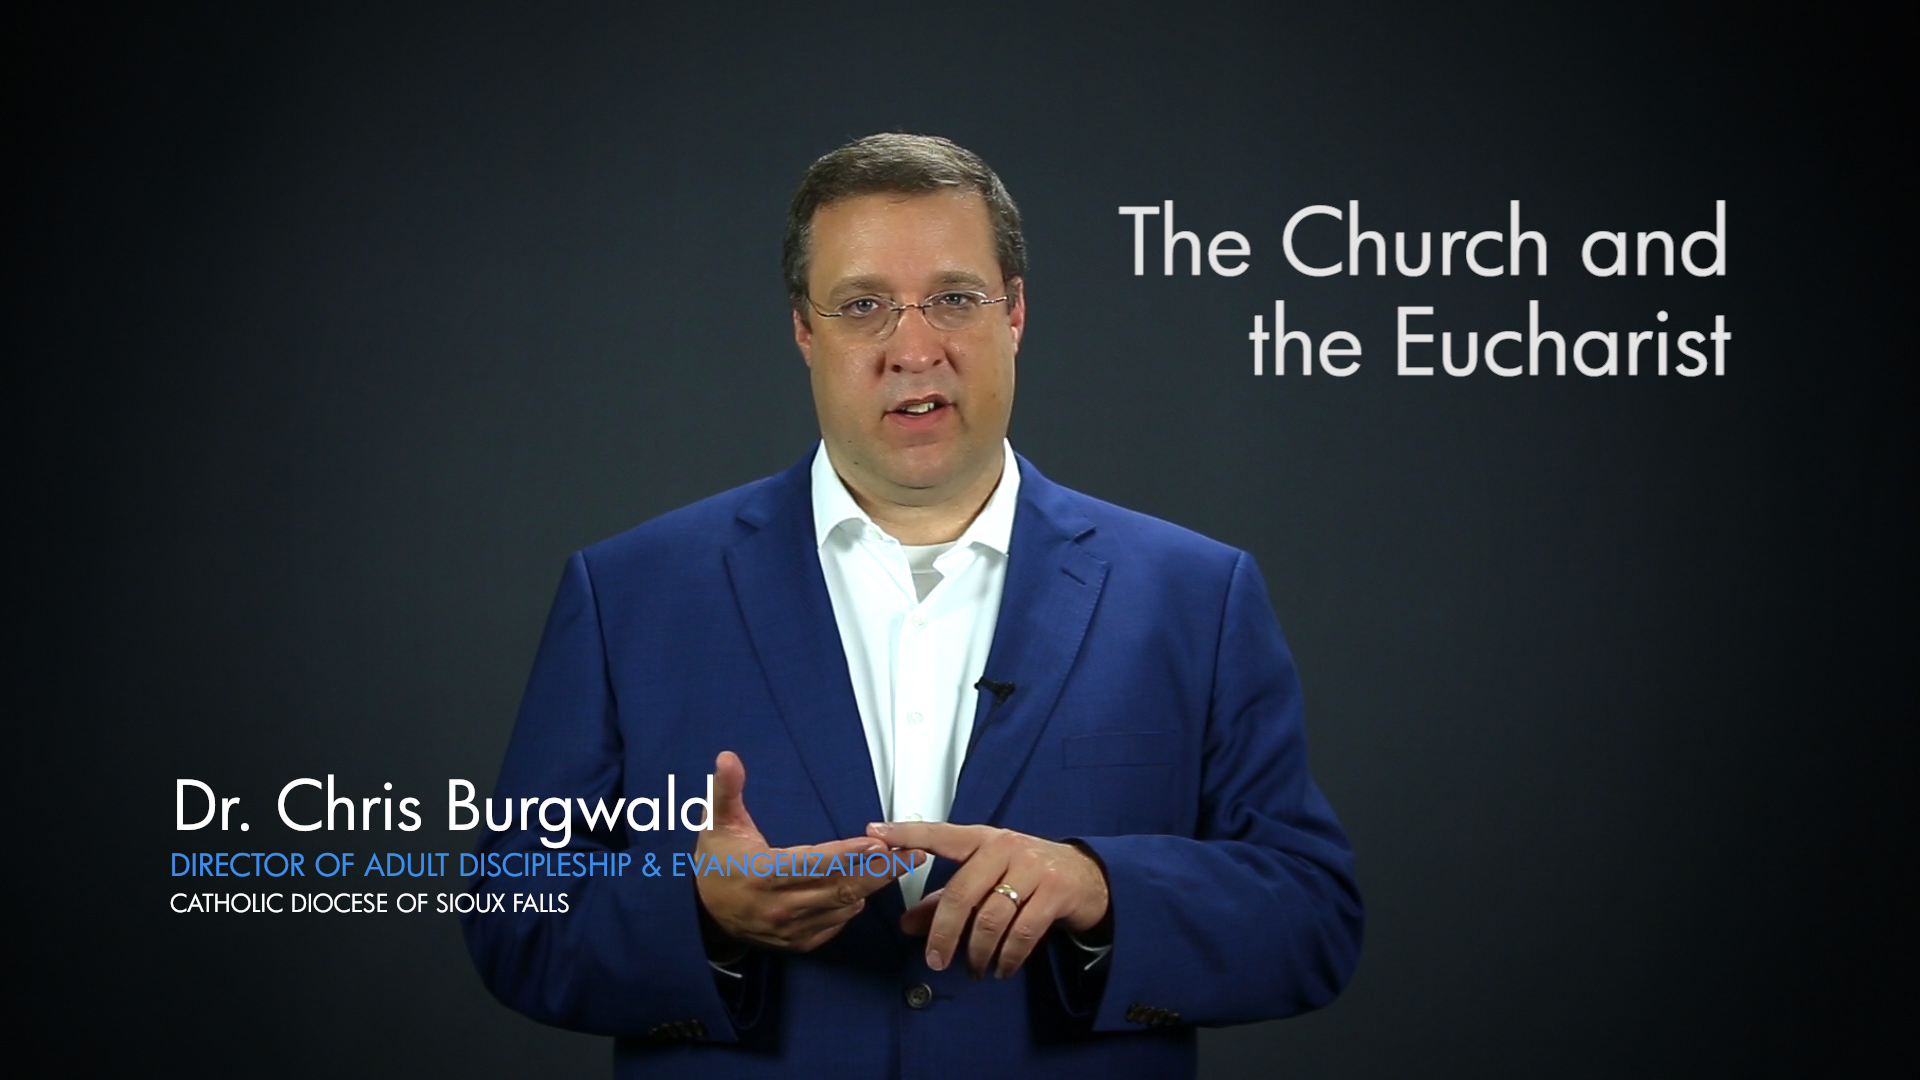 The Church and the Eucharist